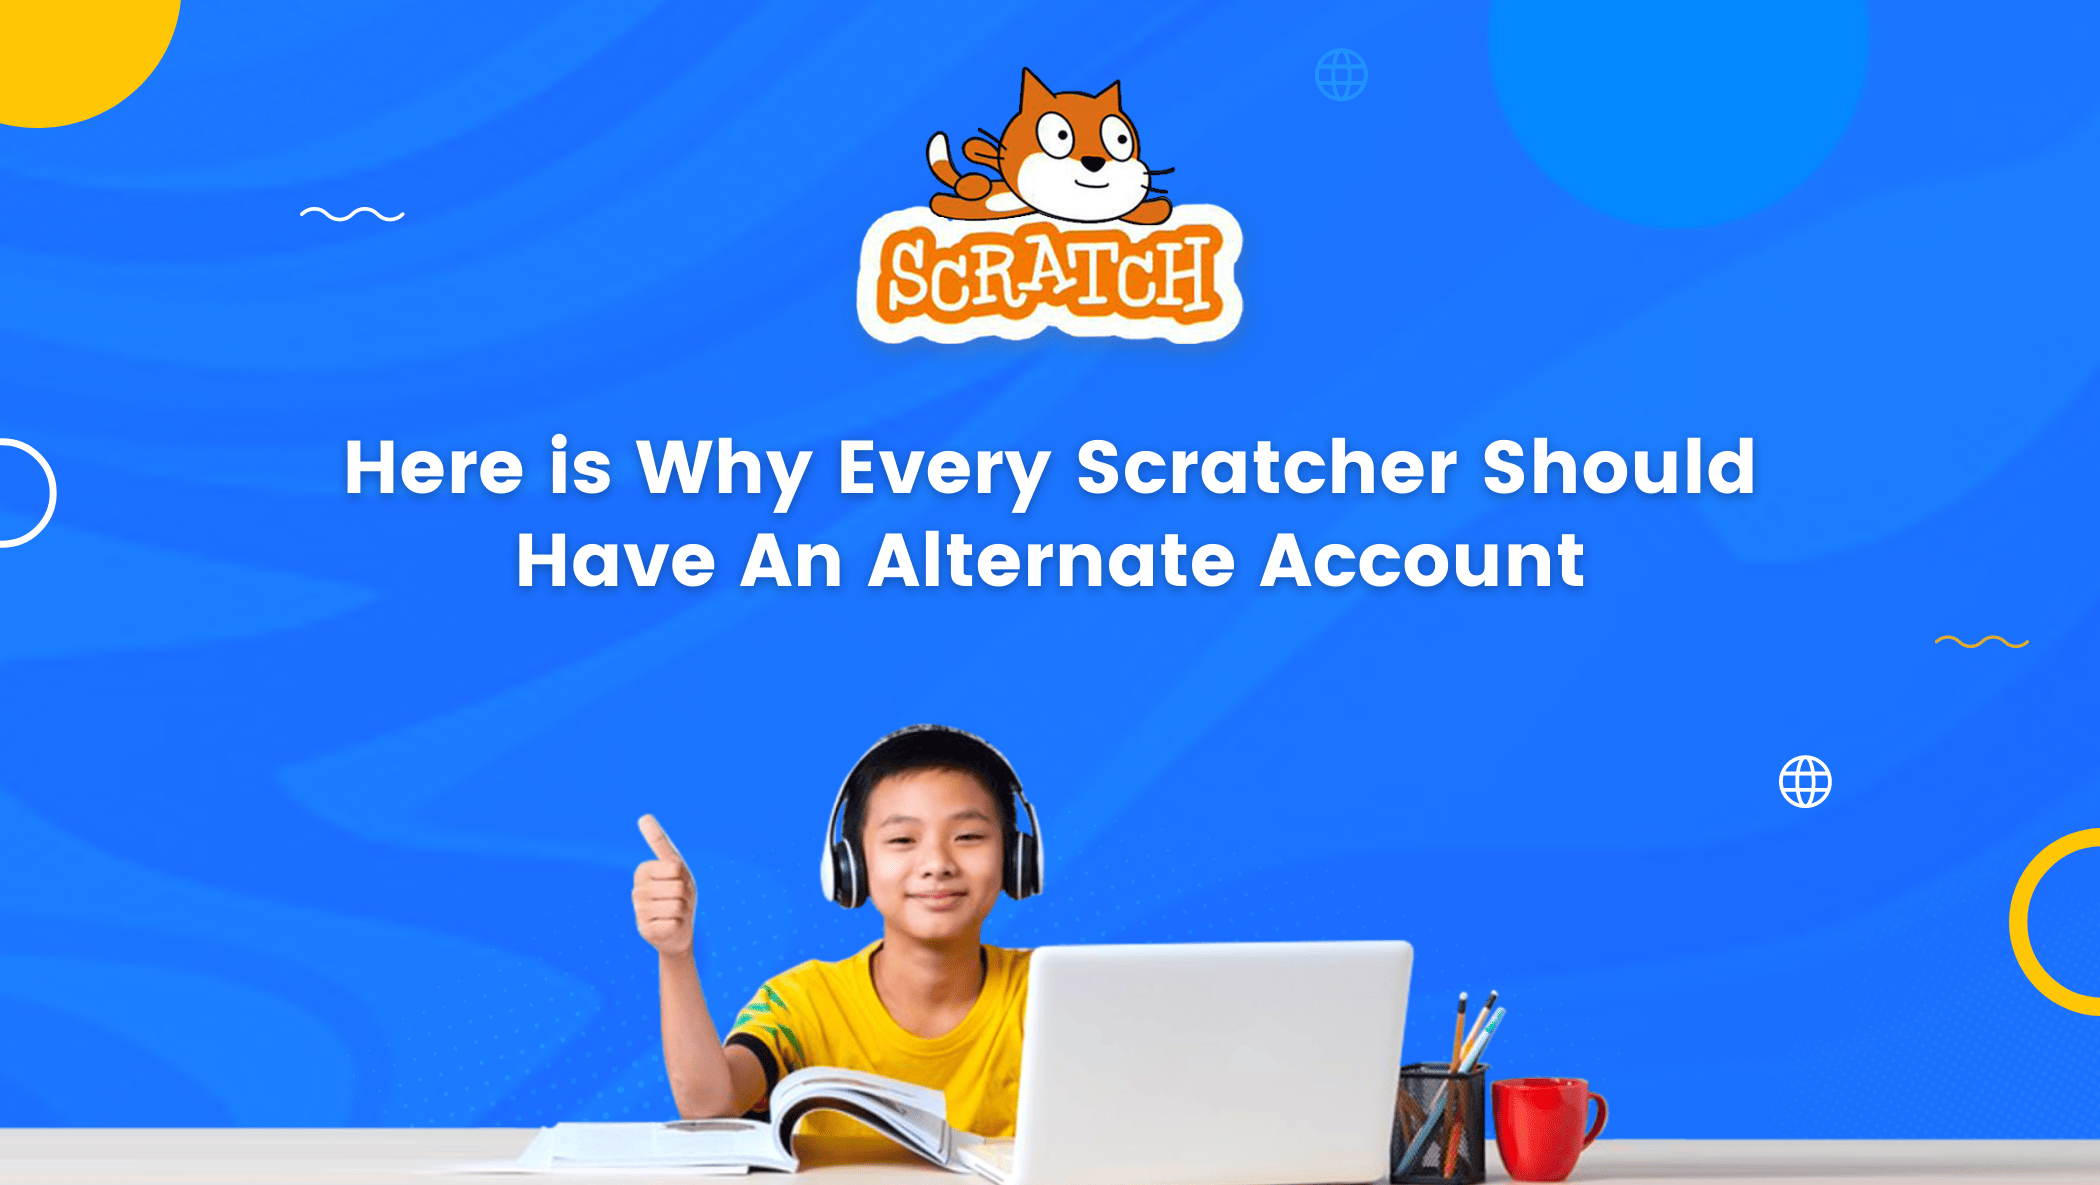 Here is Why Every Scratcher Should Have An Alternate Account